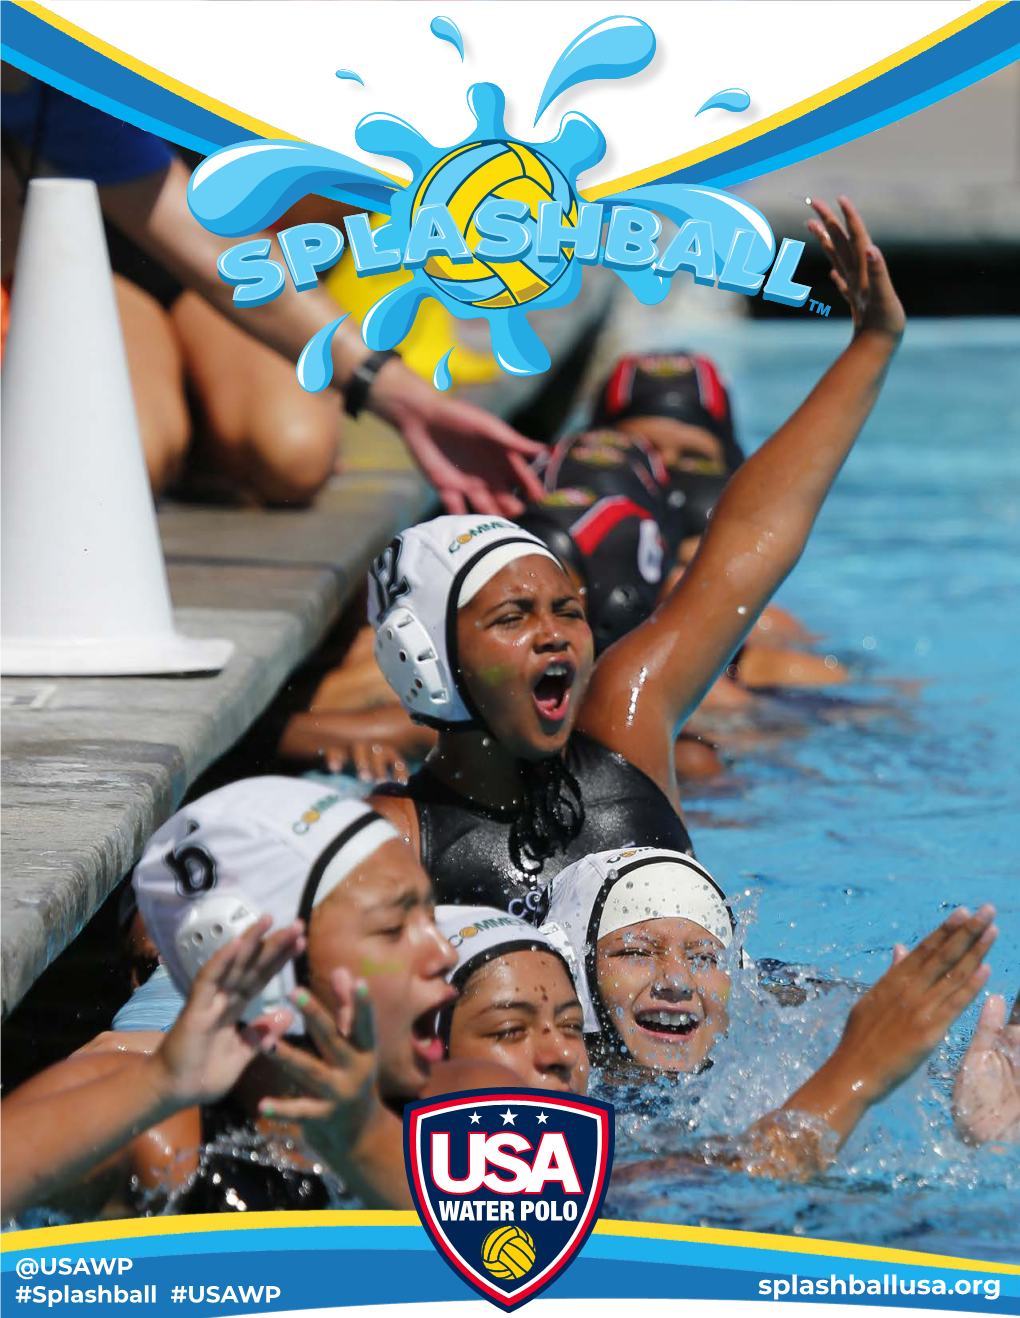 Splashballusa.Org ������������������ a Letter from USA Water Polo's CEO, Chris Ramsey